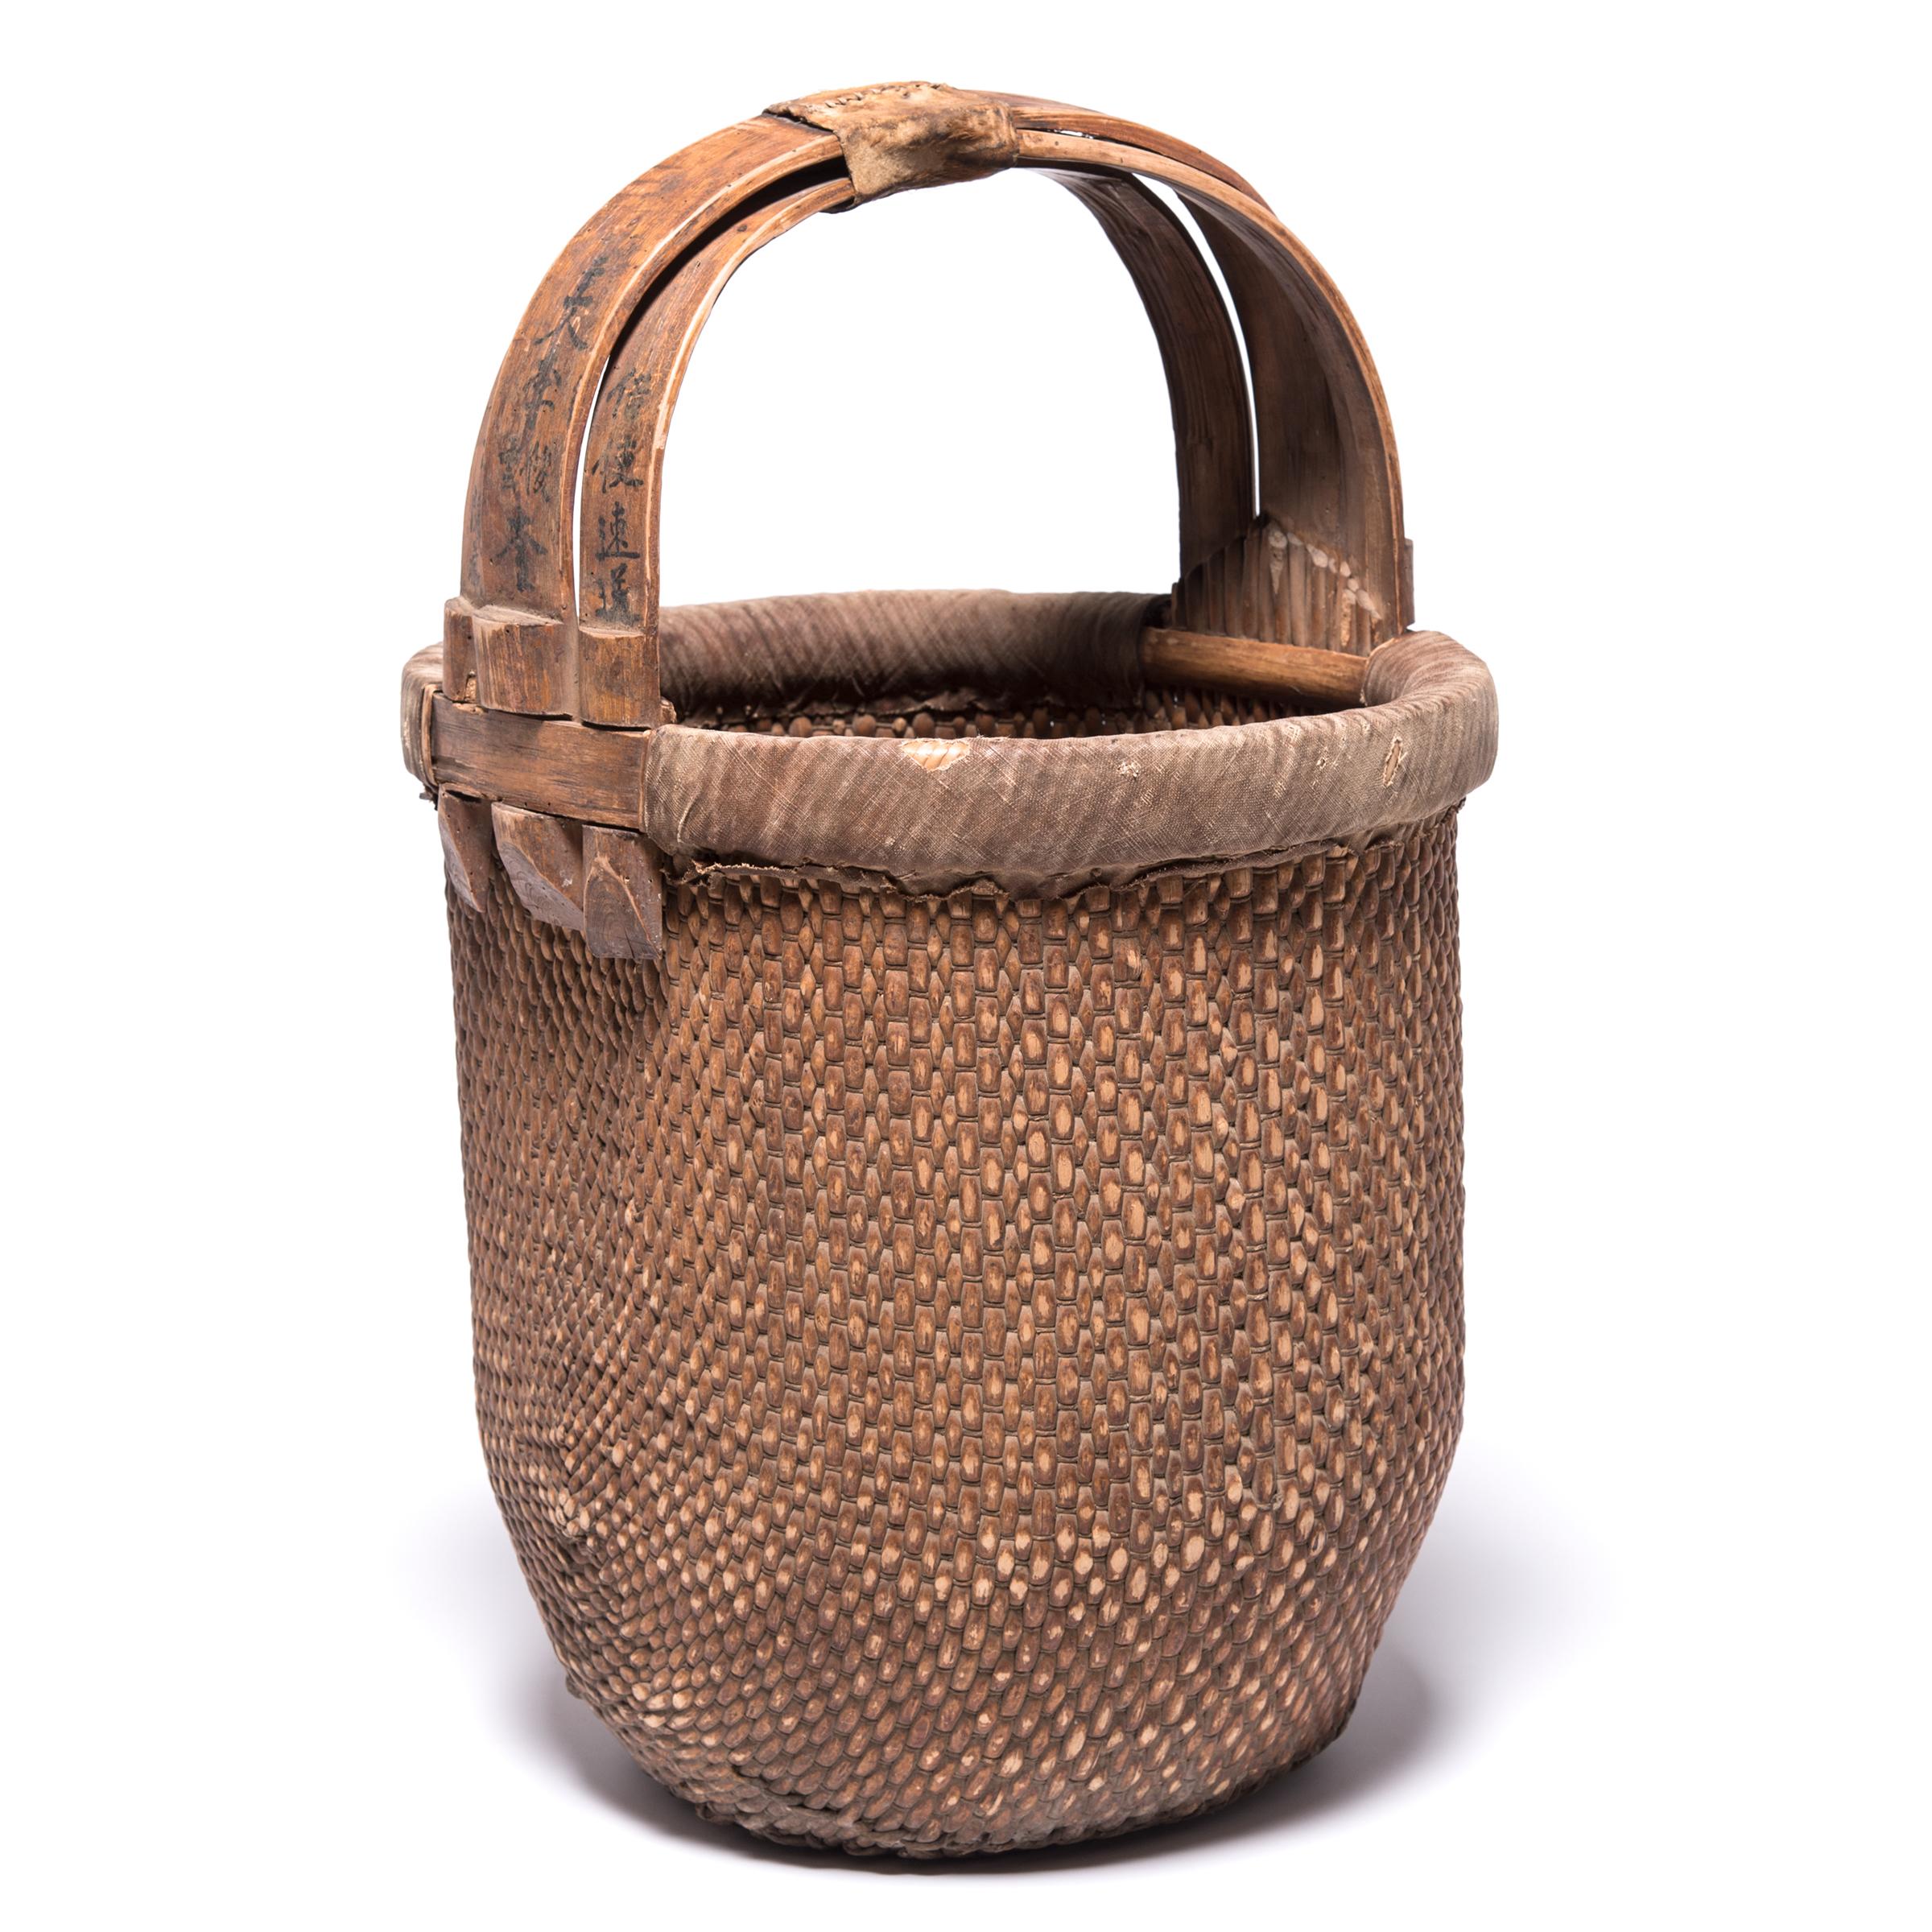 Rustic Chinese Bent Handle Fisherman's Basket, c. 1850 For Sale